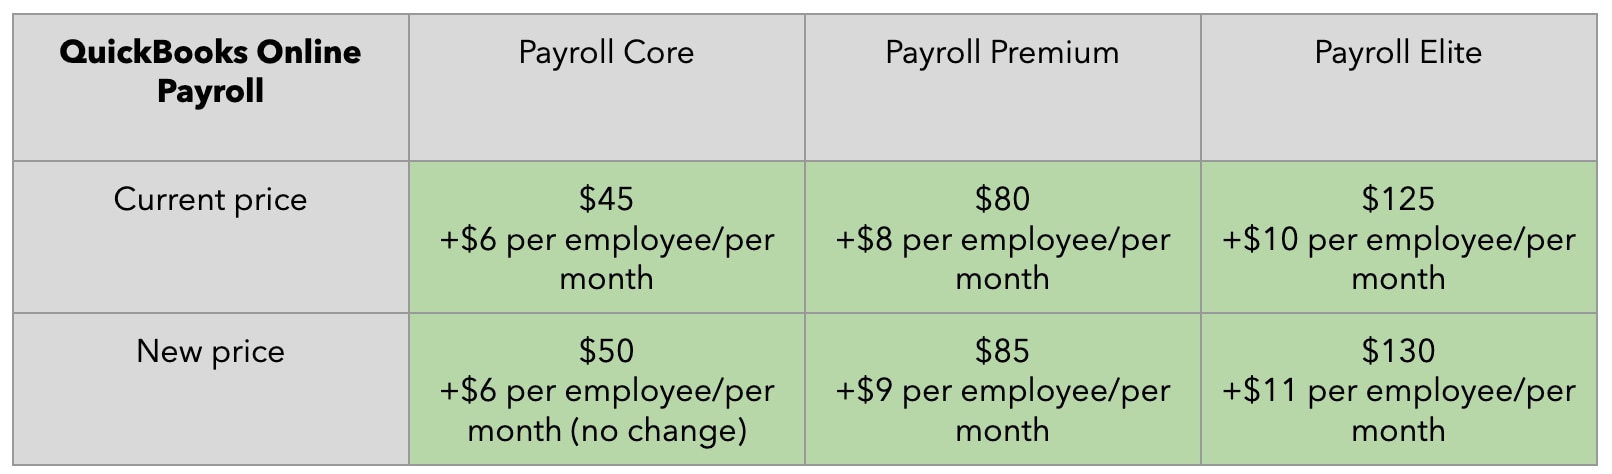 Upcoming changes to QuickBooks pricing